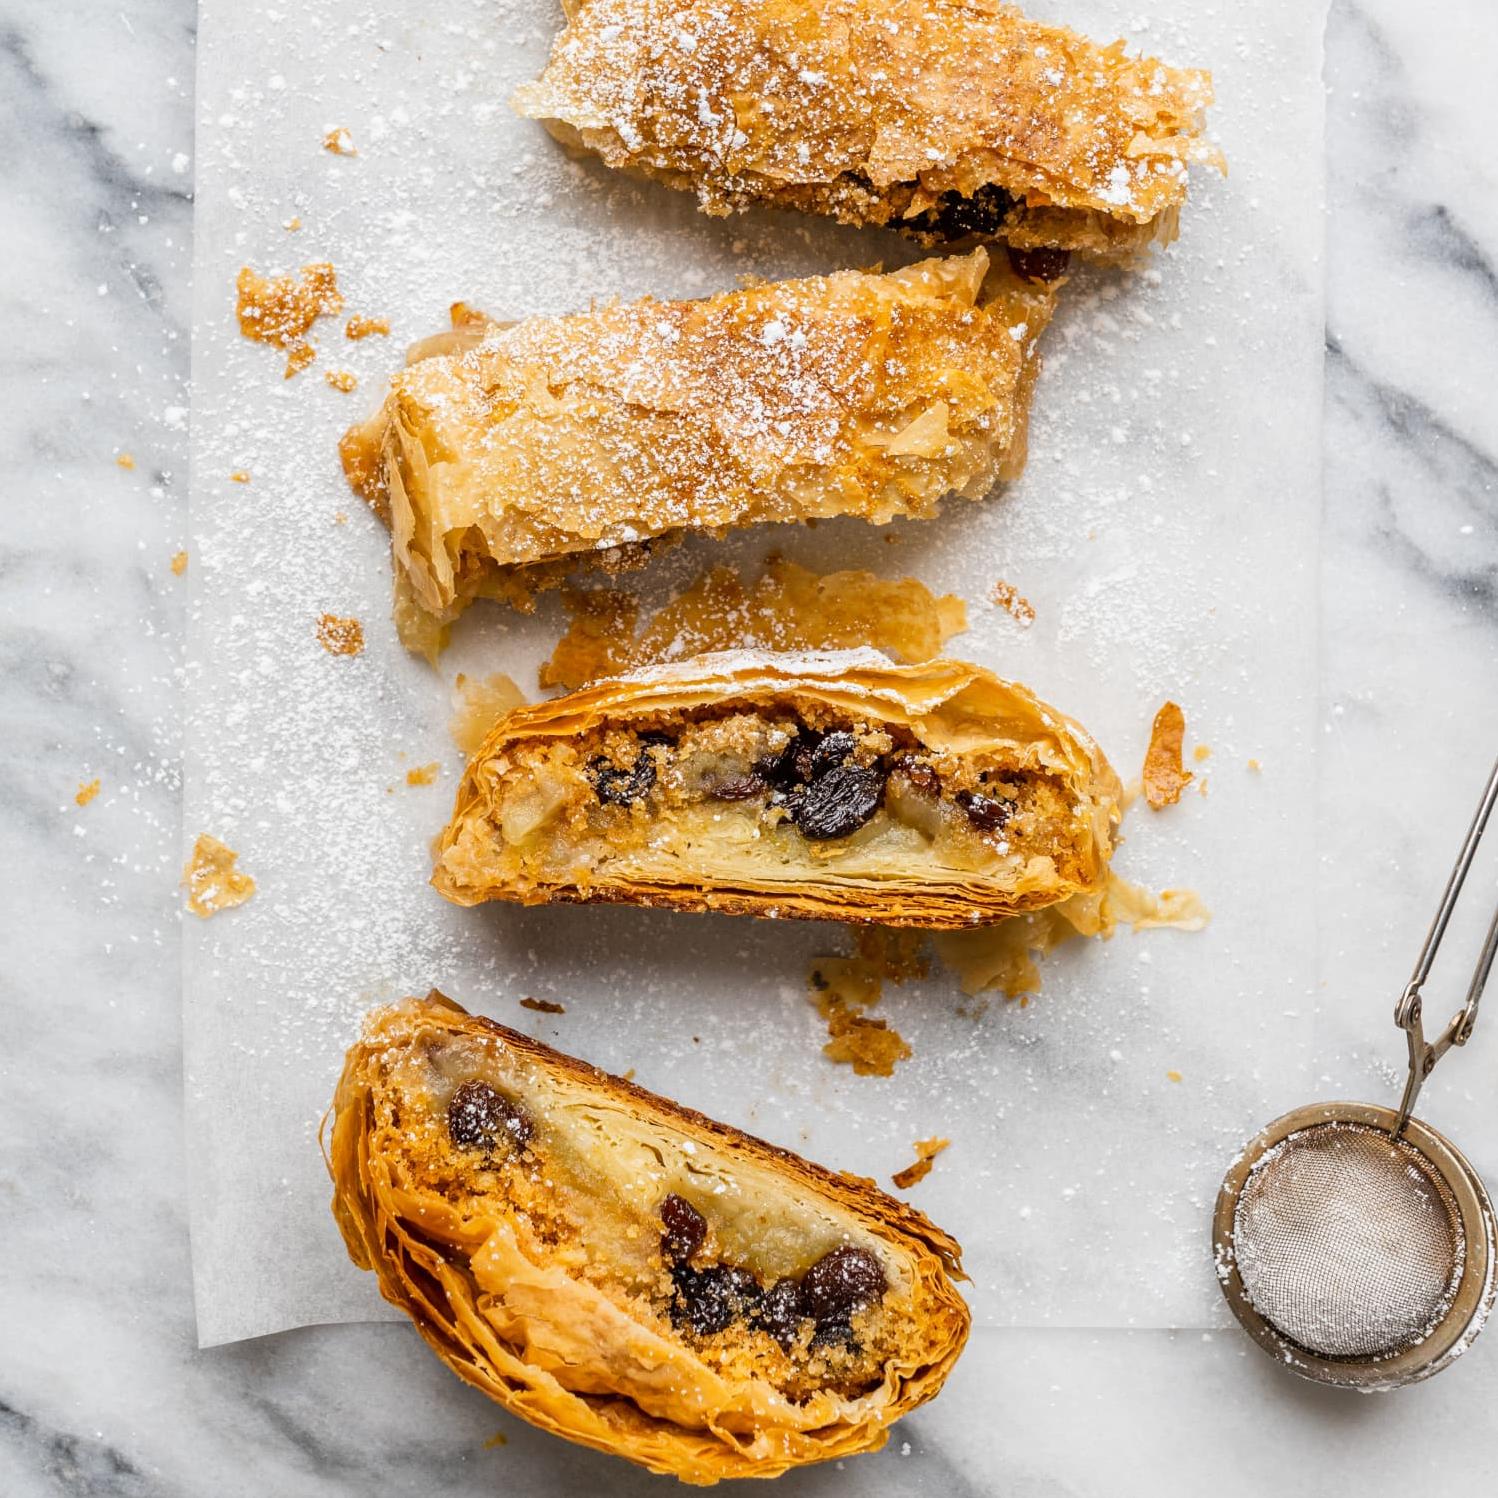  One bite of our apple strudel and you'll feel like you're in a quaint British bakery. 😍